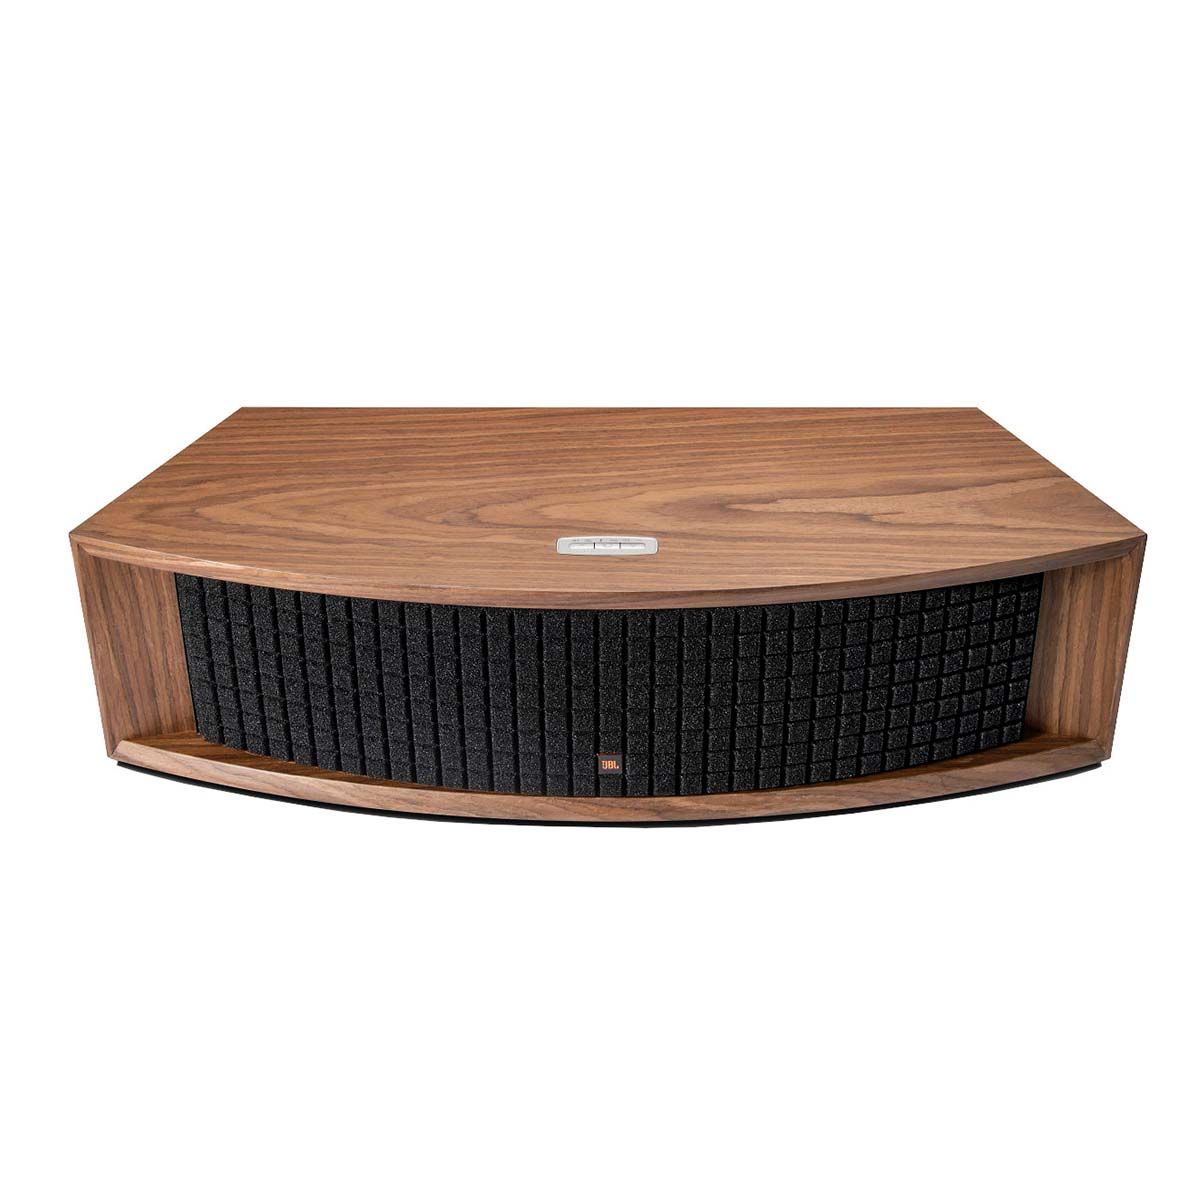 JBL L75ms Music System - Walnut angled top view with grille